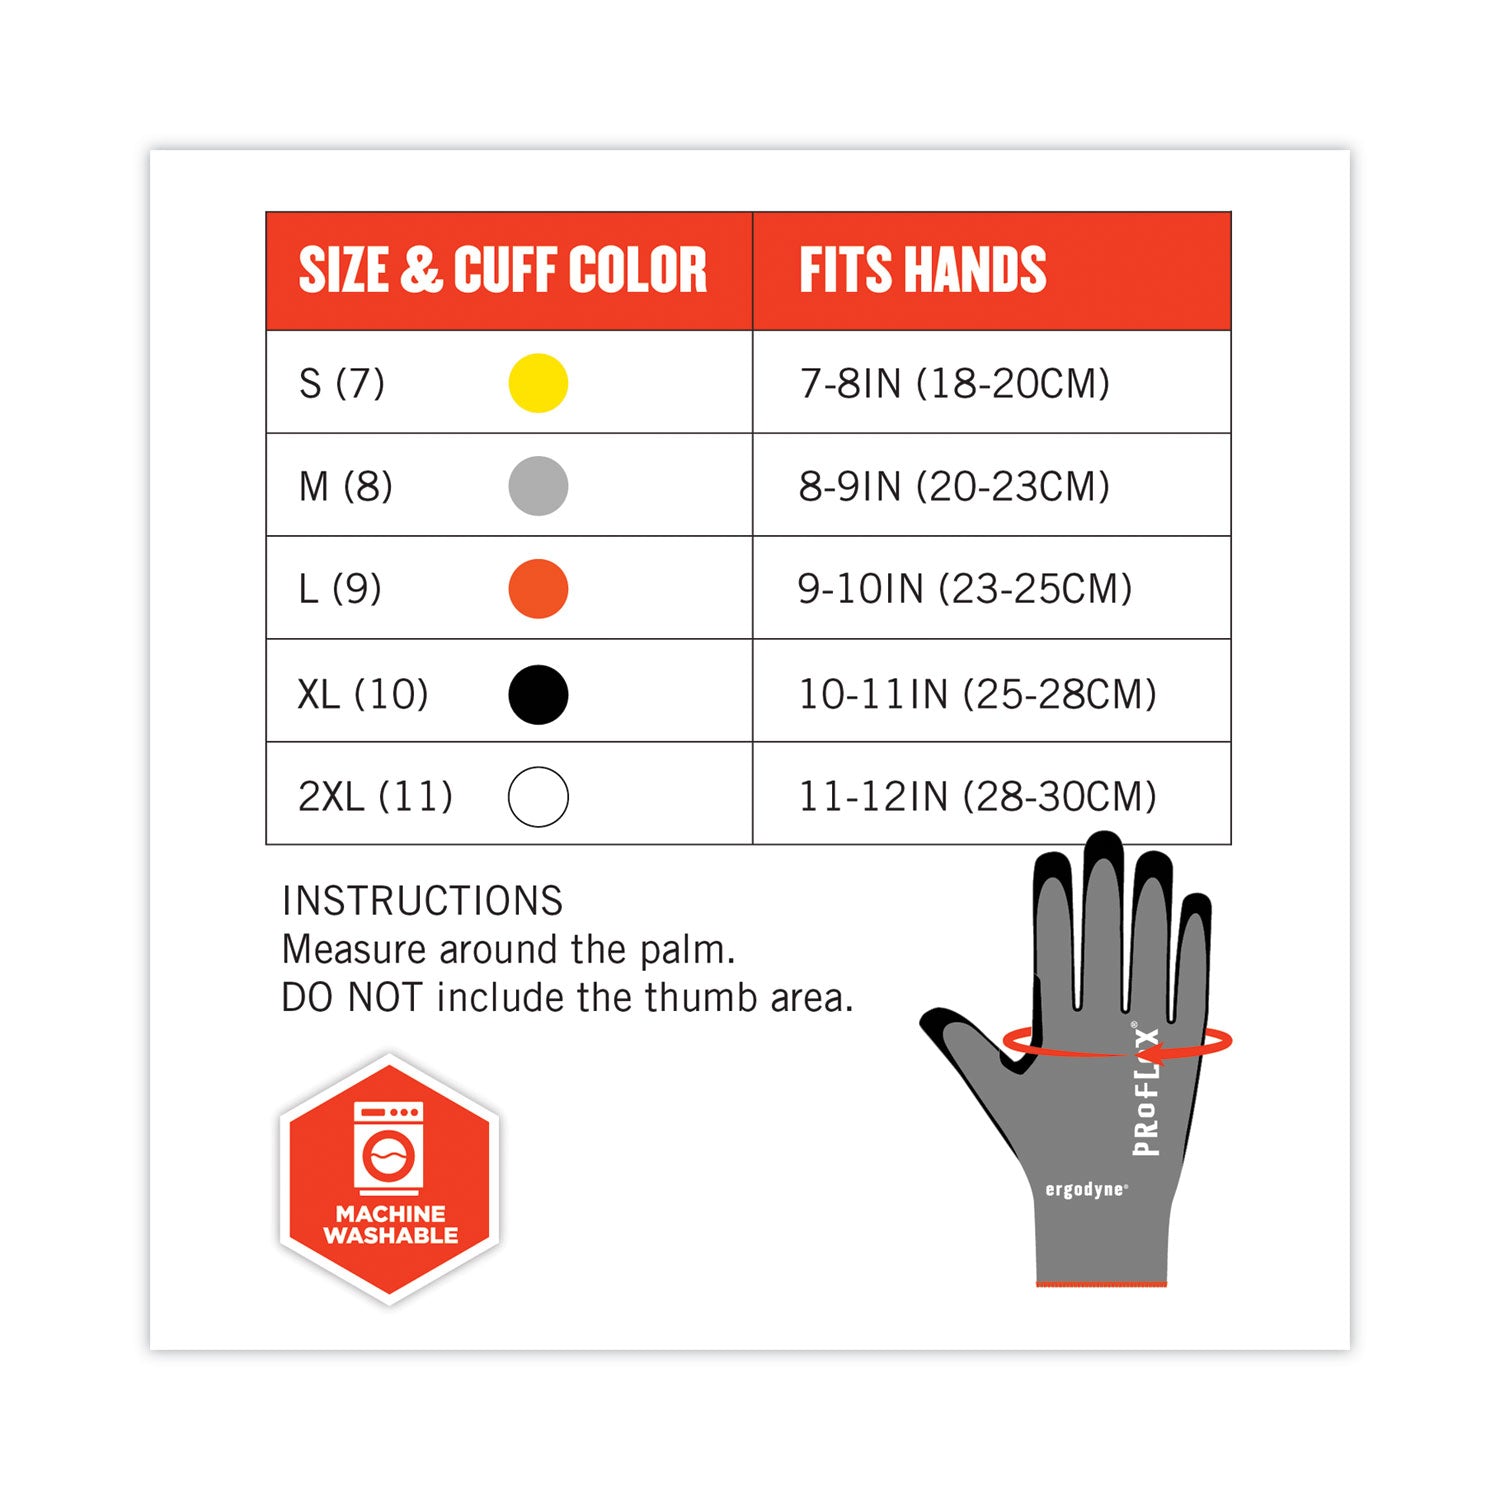 proflex-7072-ansi-a7-nitrile-coated-cr-gloves-gray-x-large-pair-ships-in-1-3-business-days_ego10315 - 3